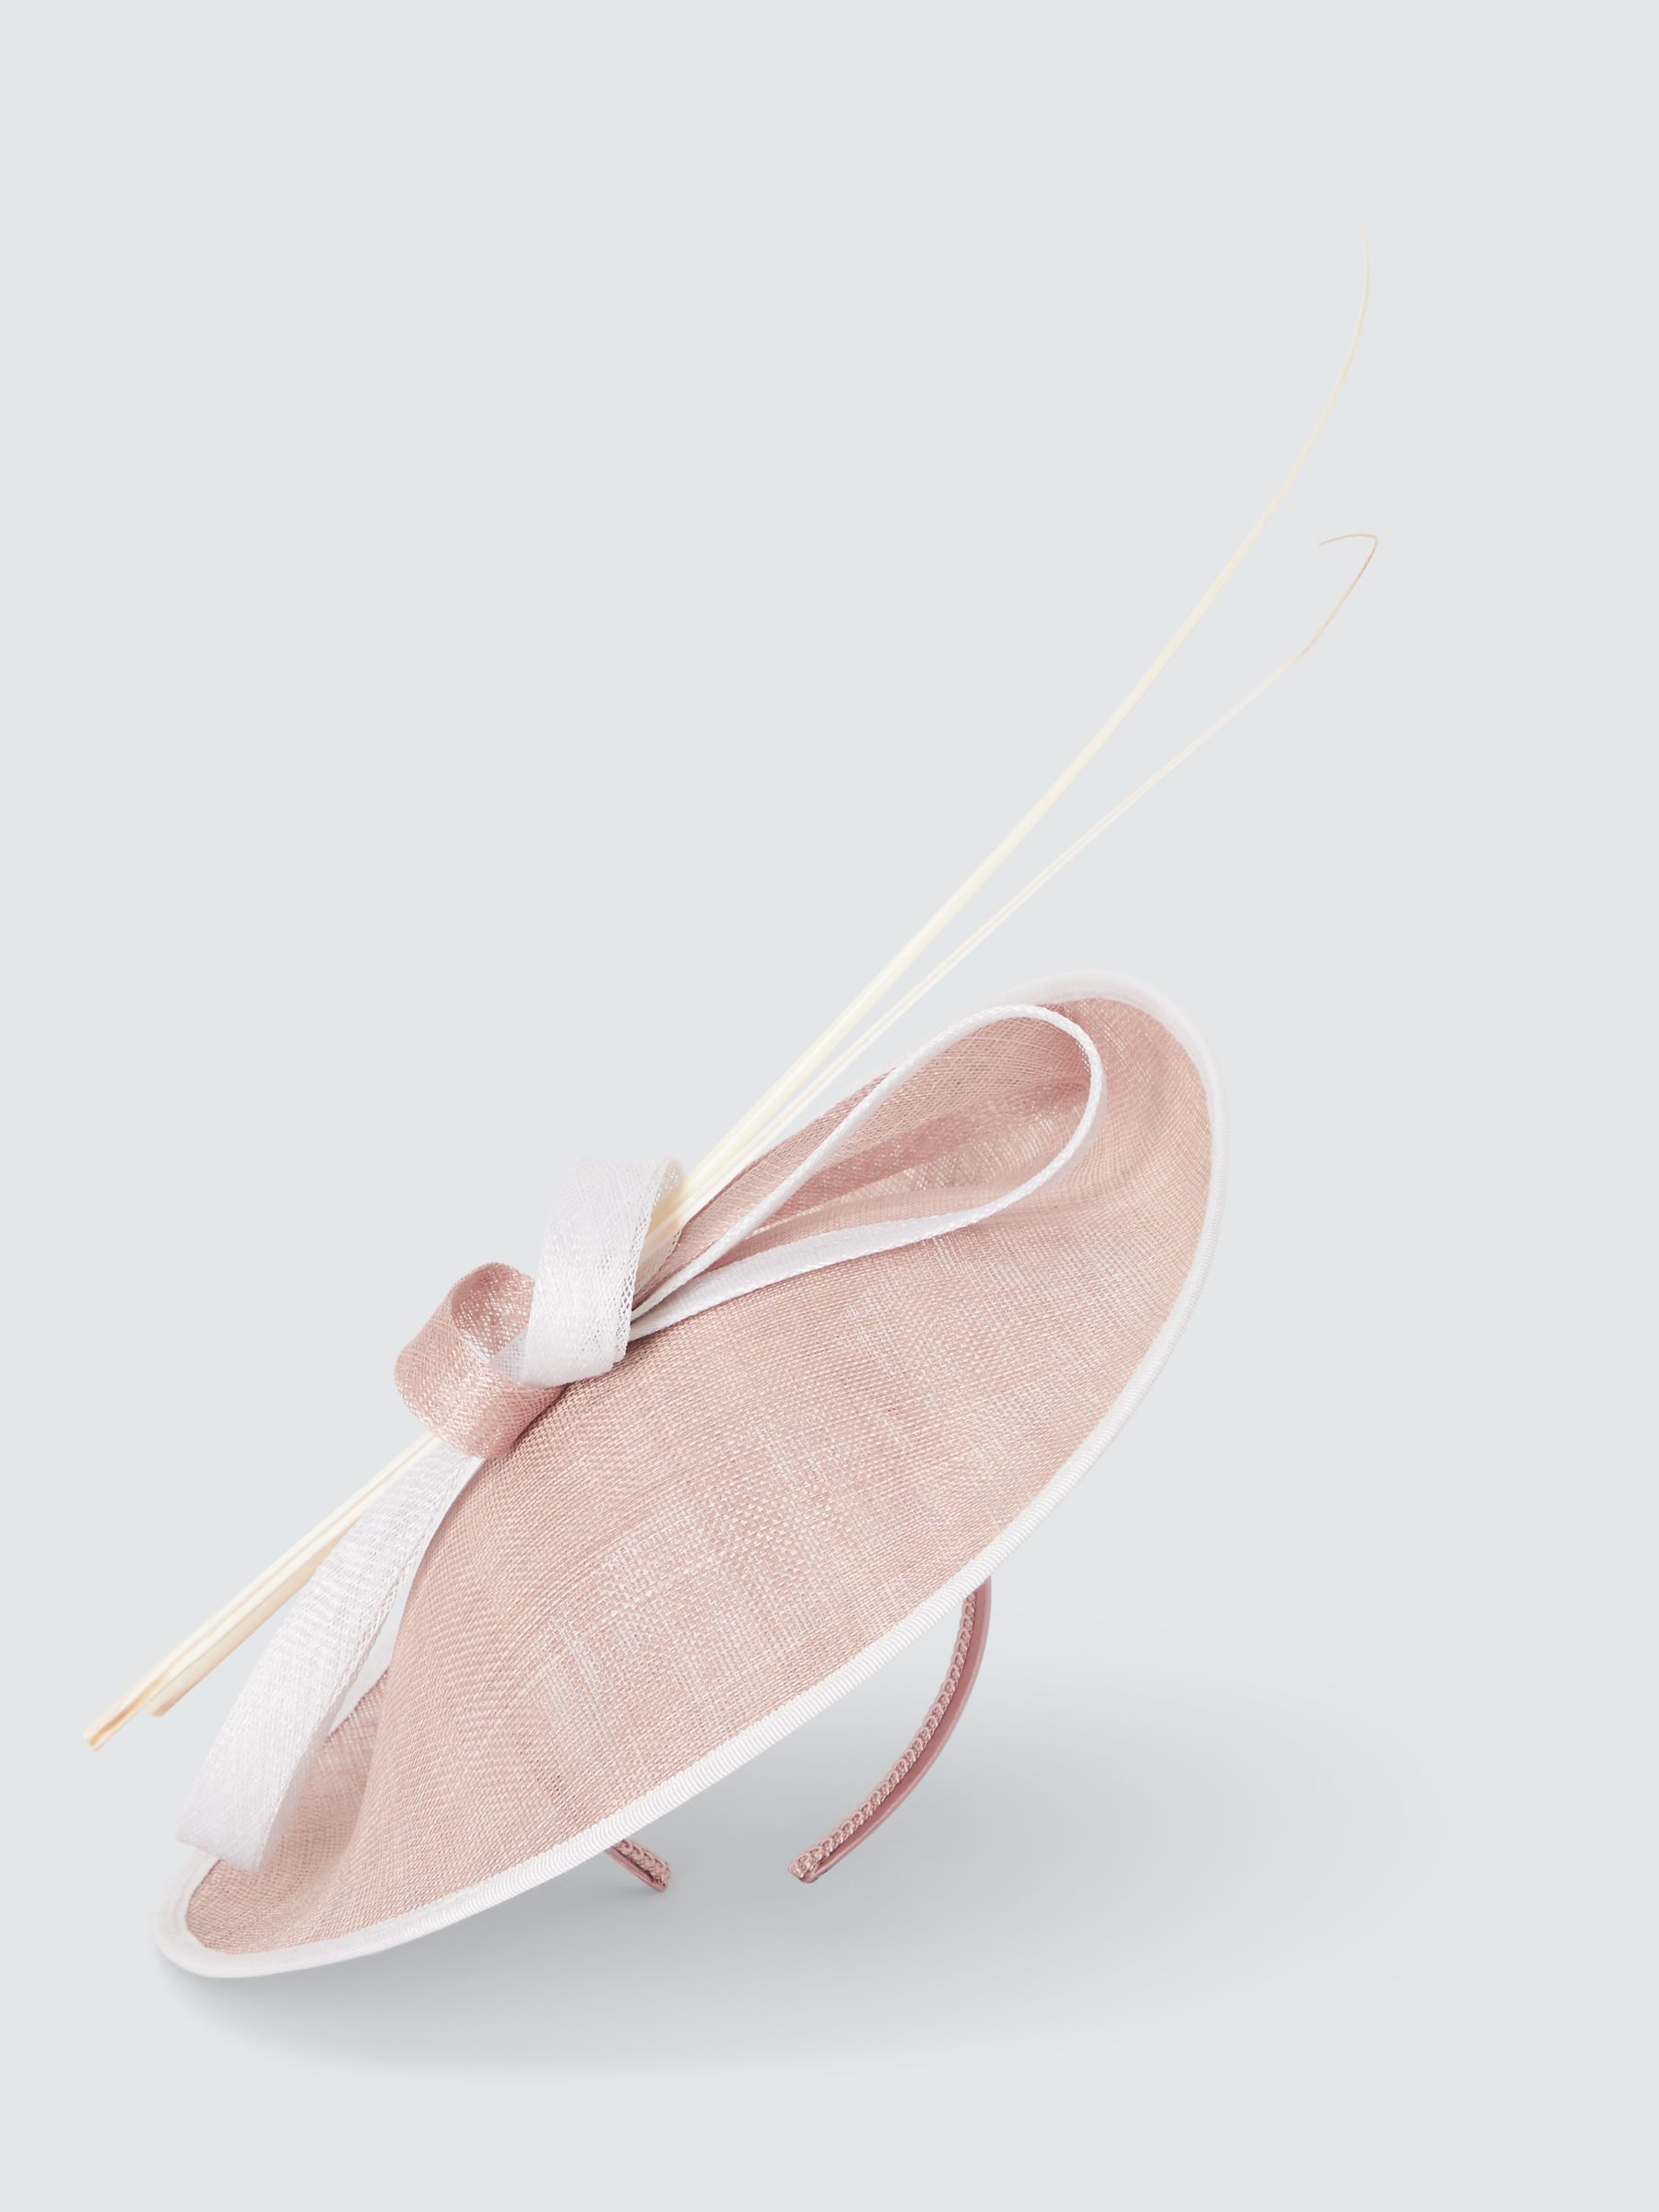 Buy John Lewis Daisy Quill Upturn Fascinator Occasion Hat, Rose Online at johnlewis.com